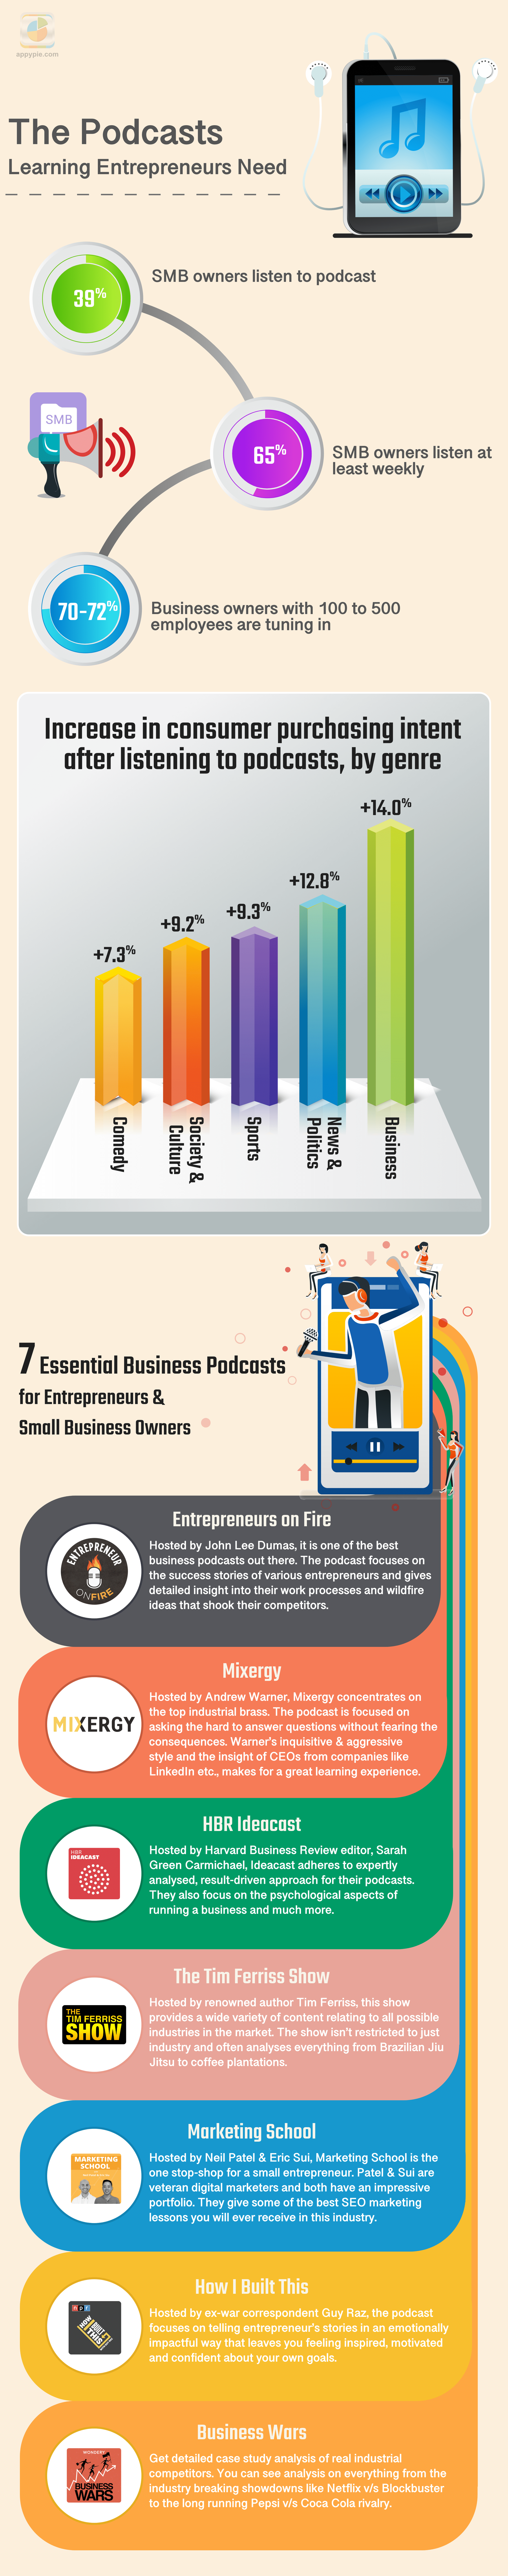 7 Essential Business Podcasts for Entrepreneurs & Small Business Owners